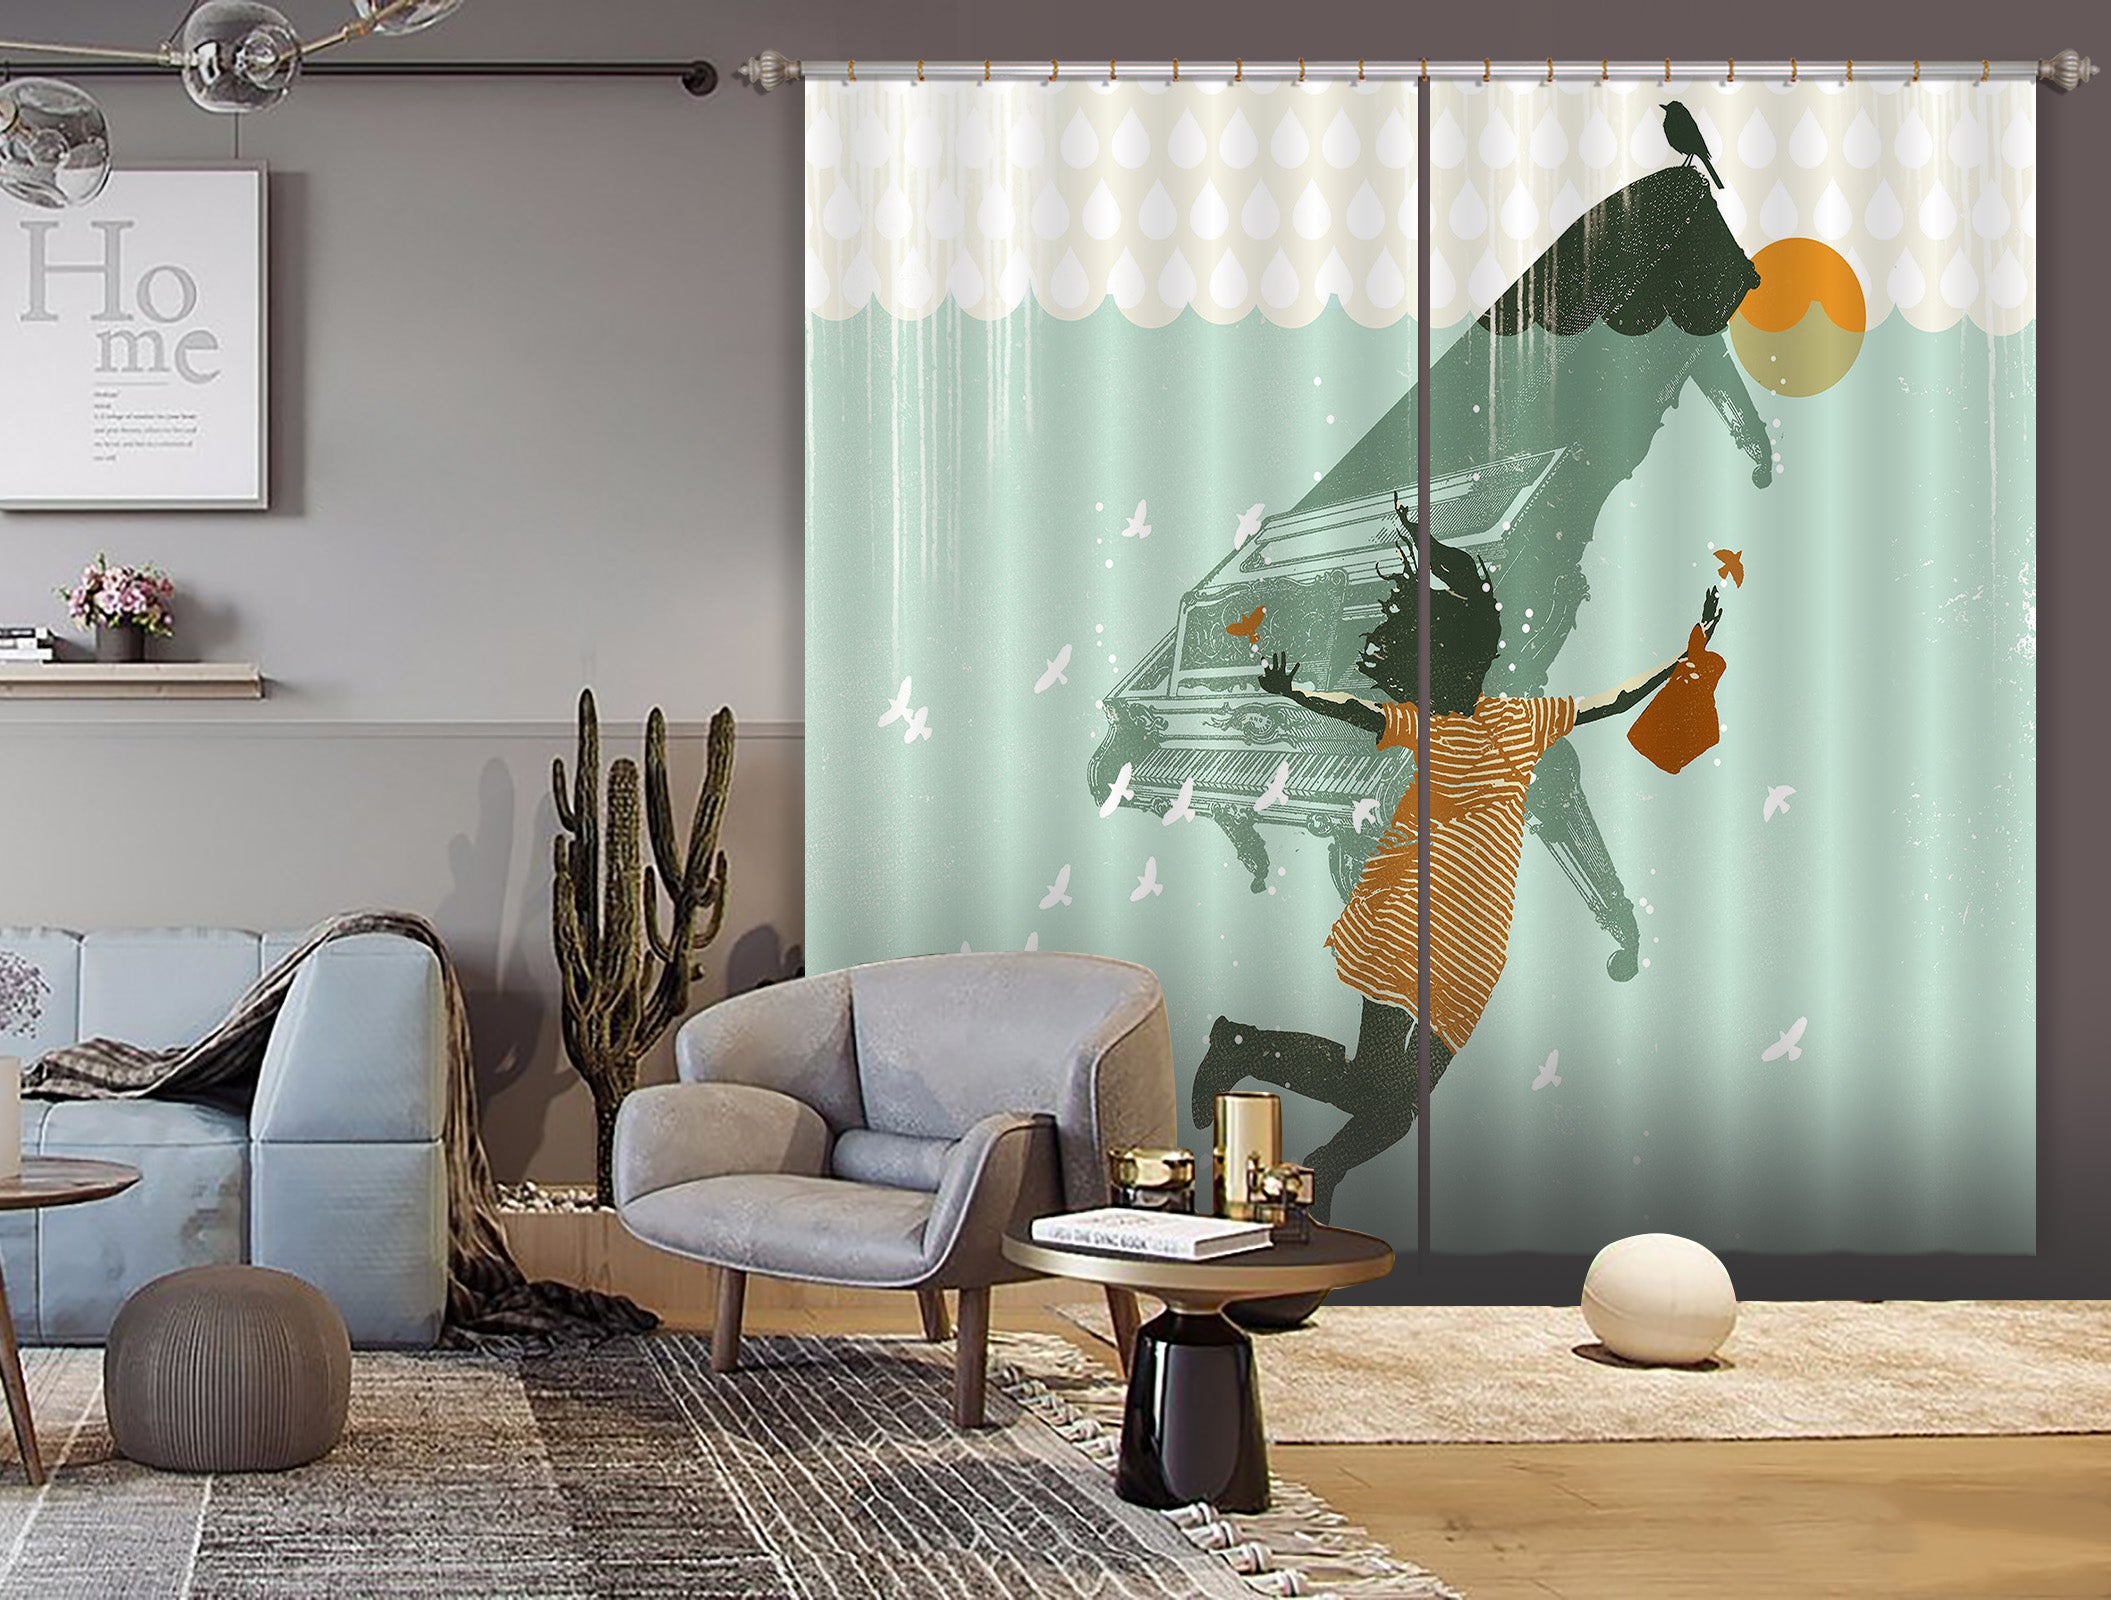 3D Swimming In Water 058 Showdeer Curtain Curtains Drapes